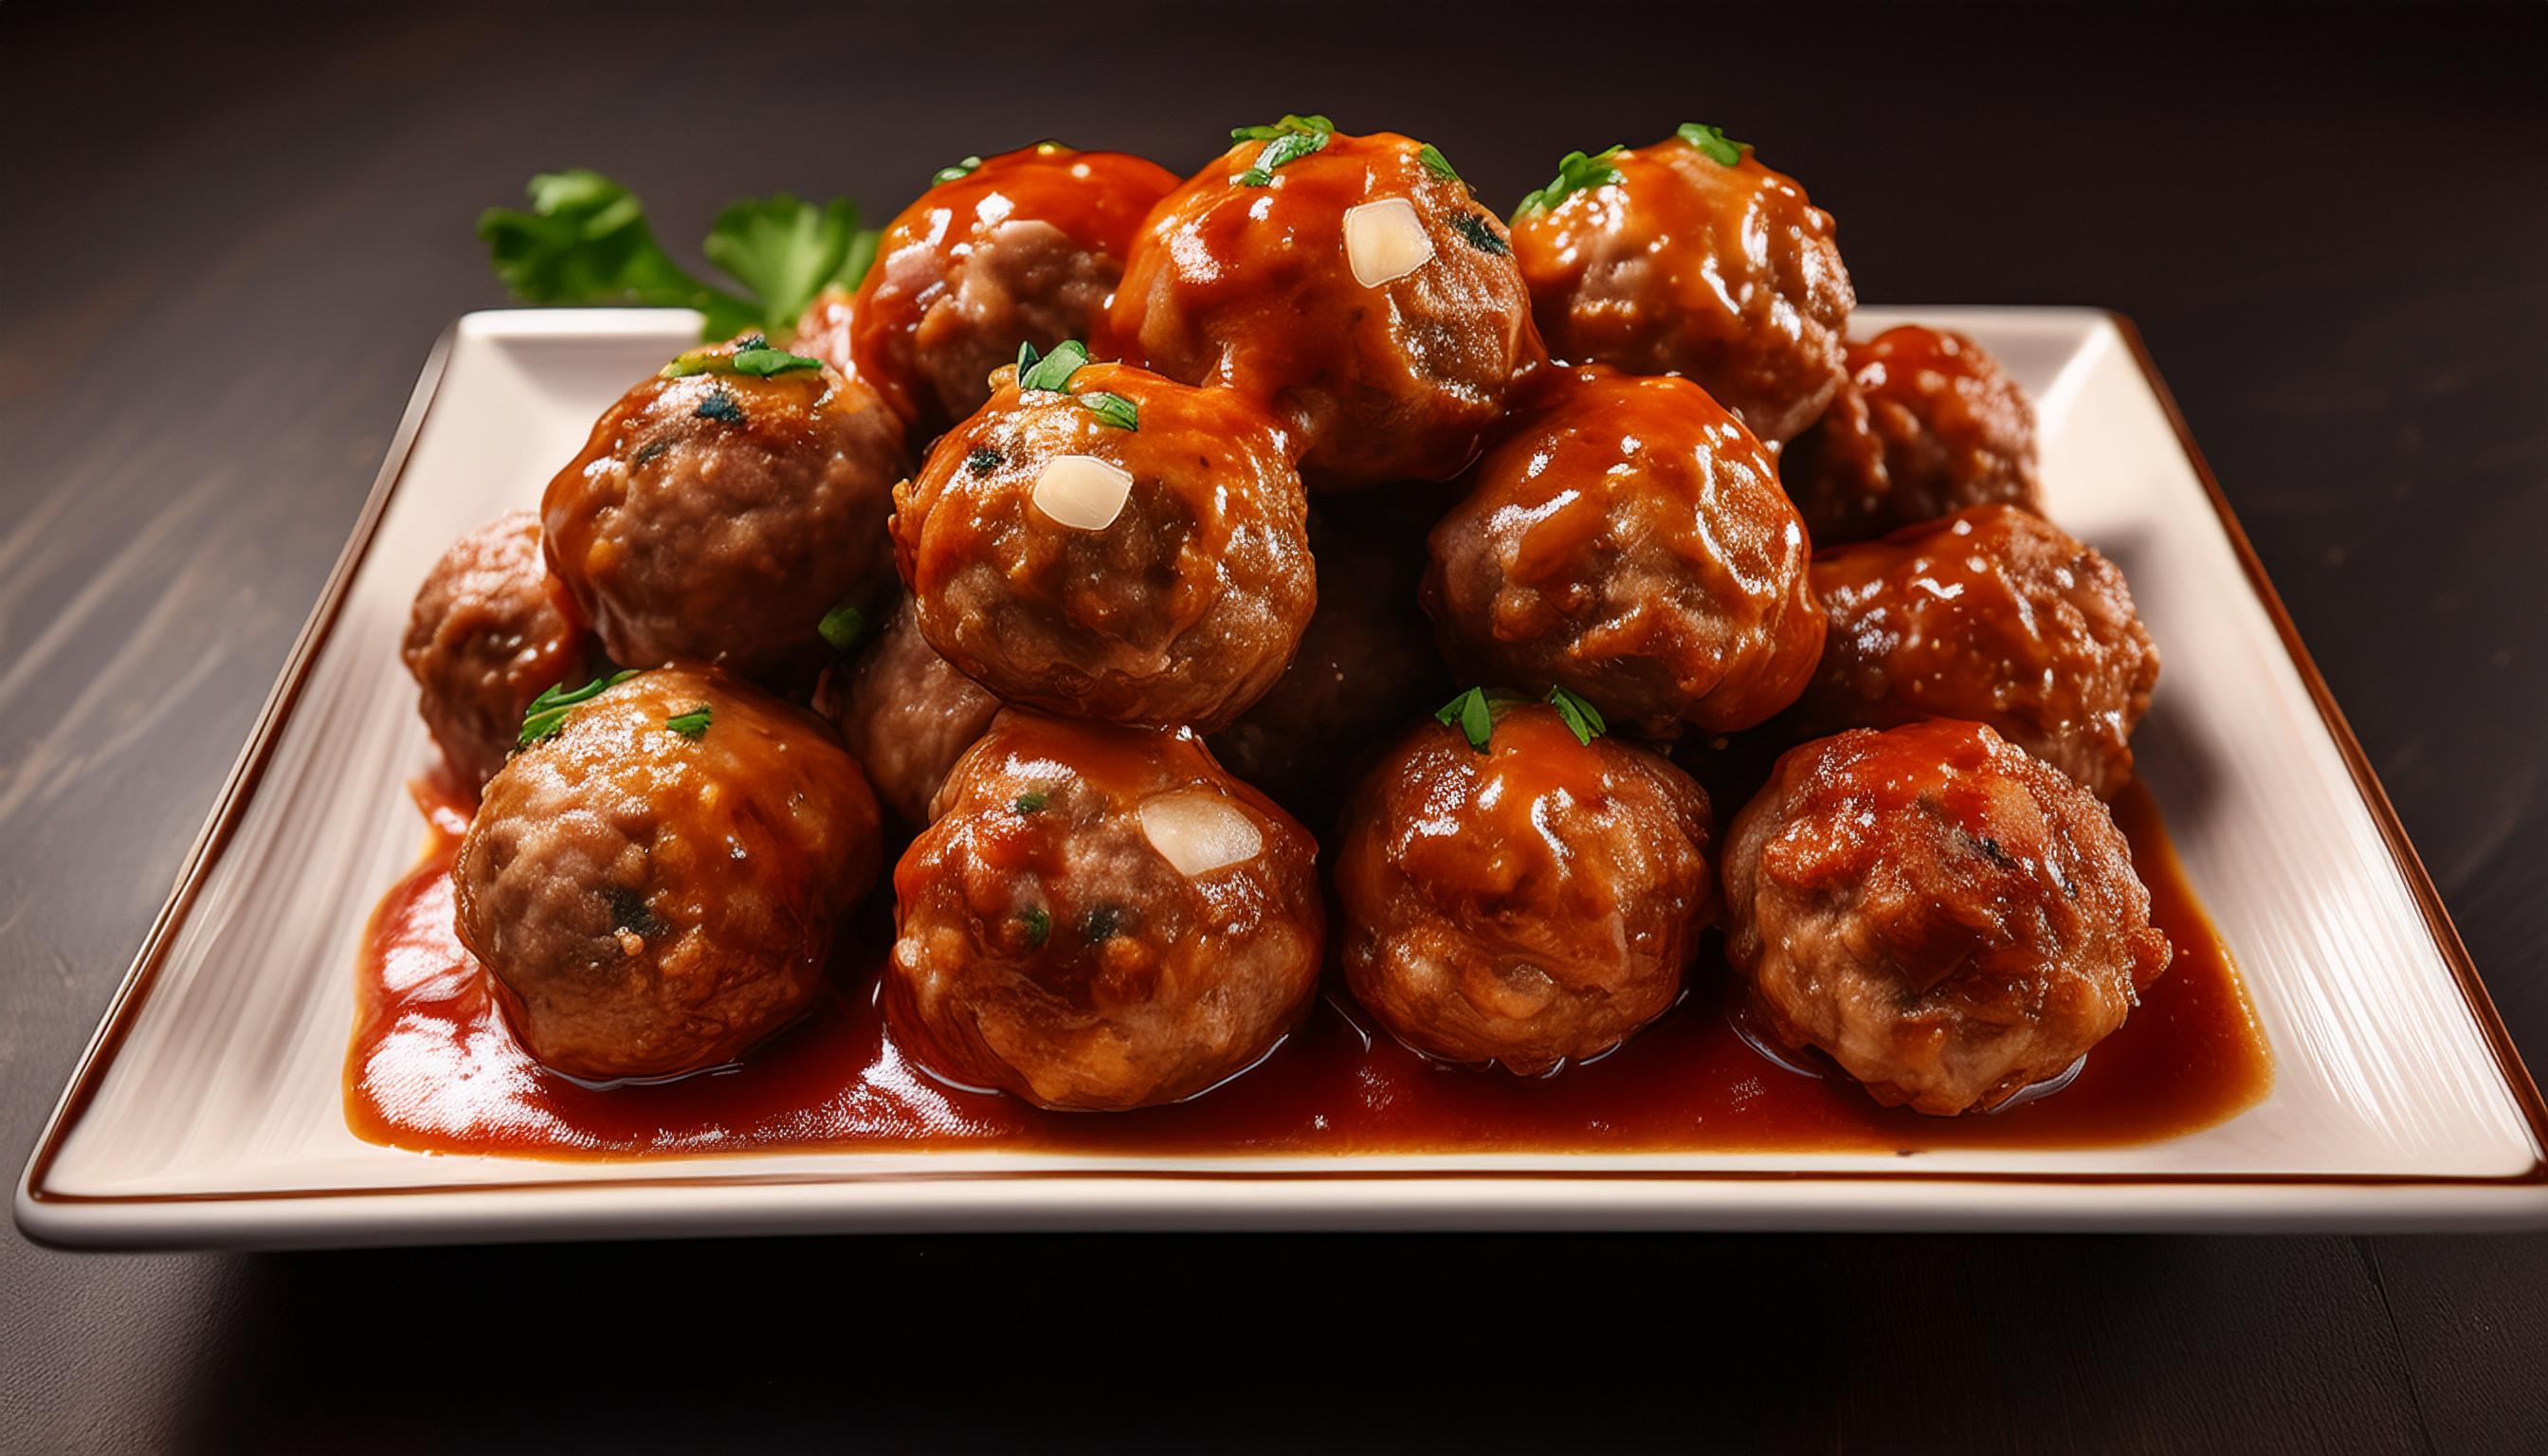 Juicy, Tender, Flavorful: Master the Art of the Perfect Meatball